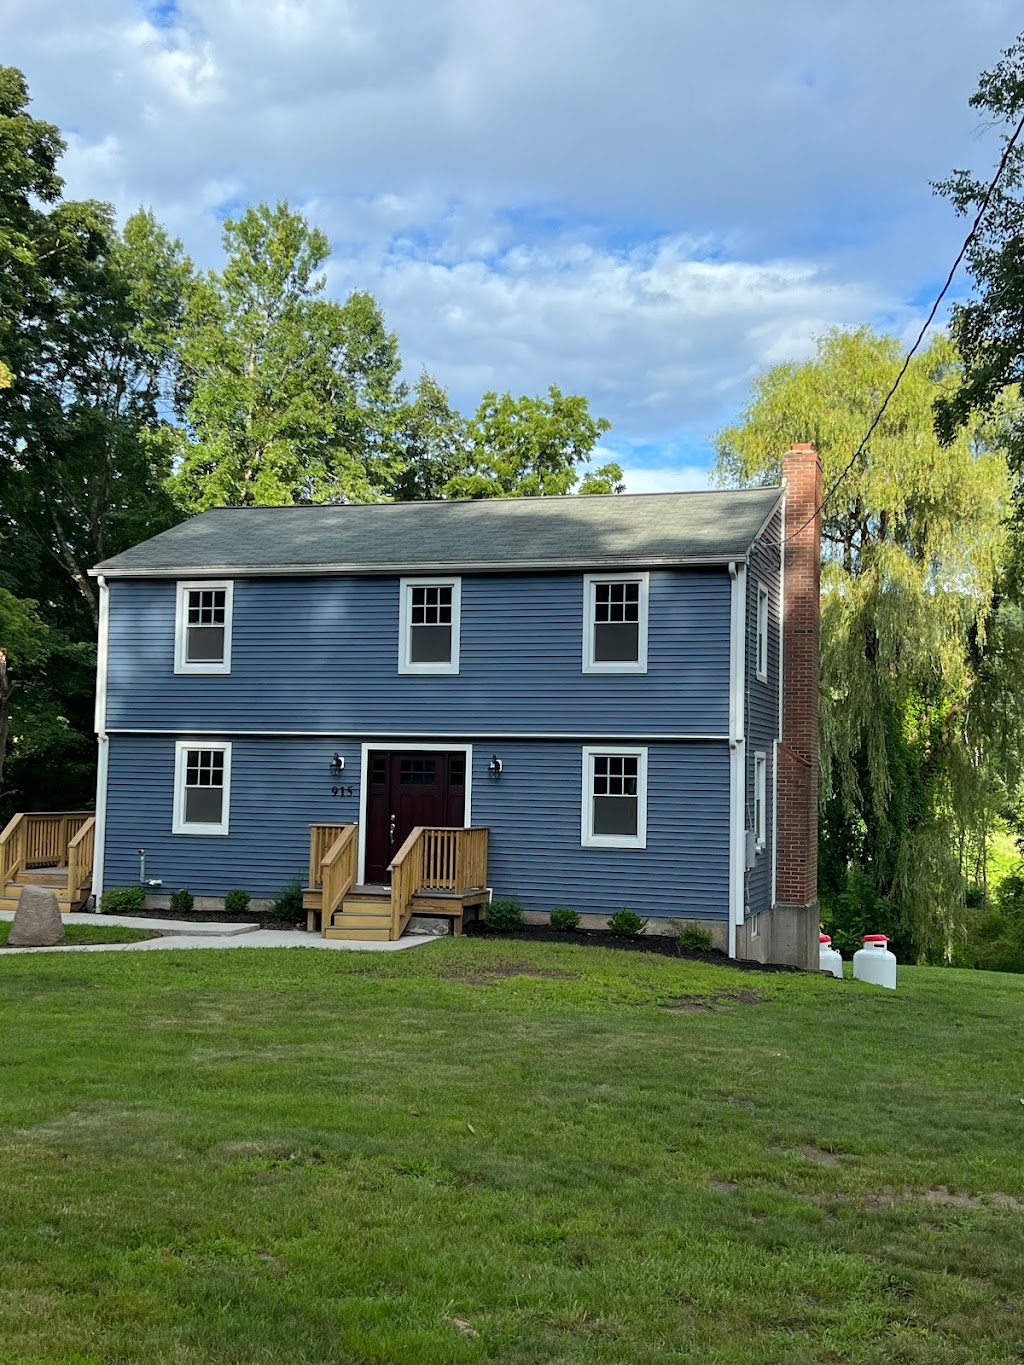 Trend 2000 Real Estate | 171 Elm St, Enfield, CT 06082 | Phone: (860) 841-1199